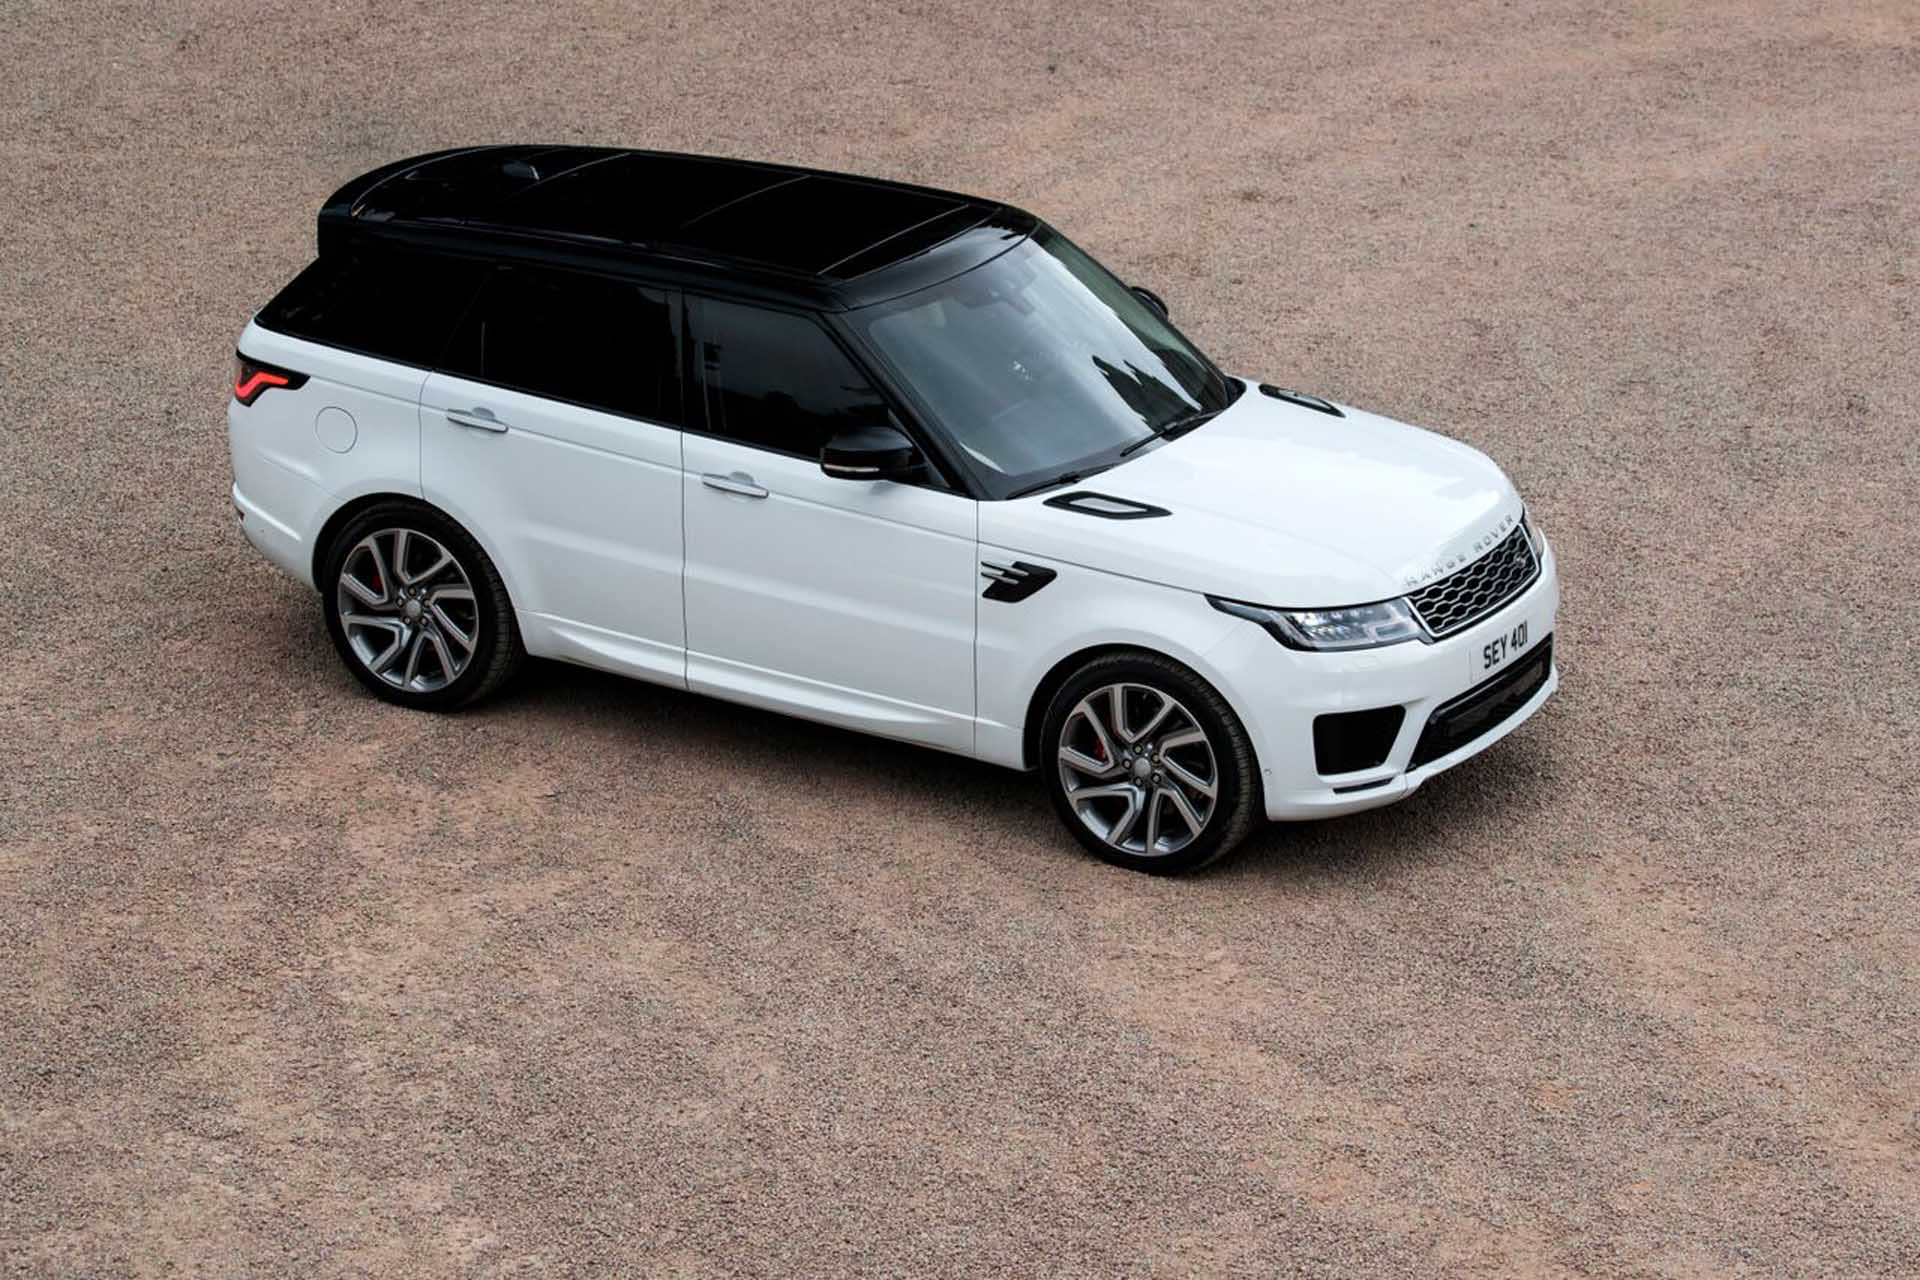 Range Rover Autobiography Supercharged 2020  : Explore The Range Rover Models Here.